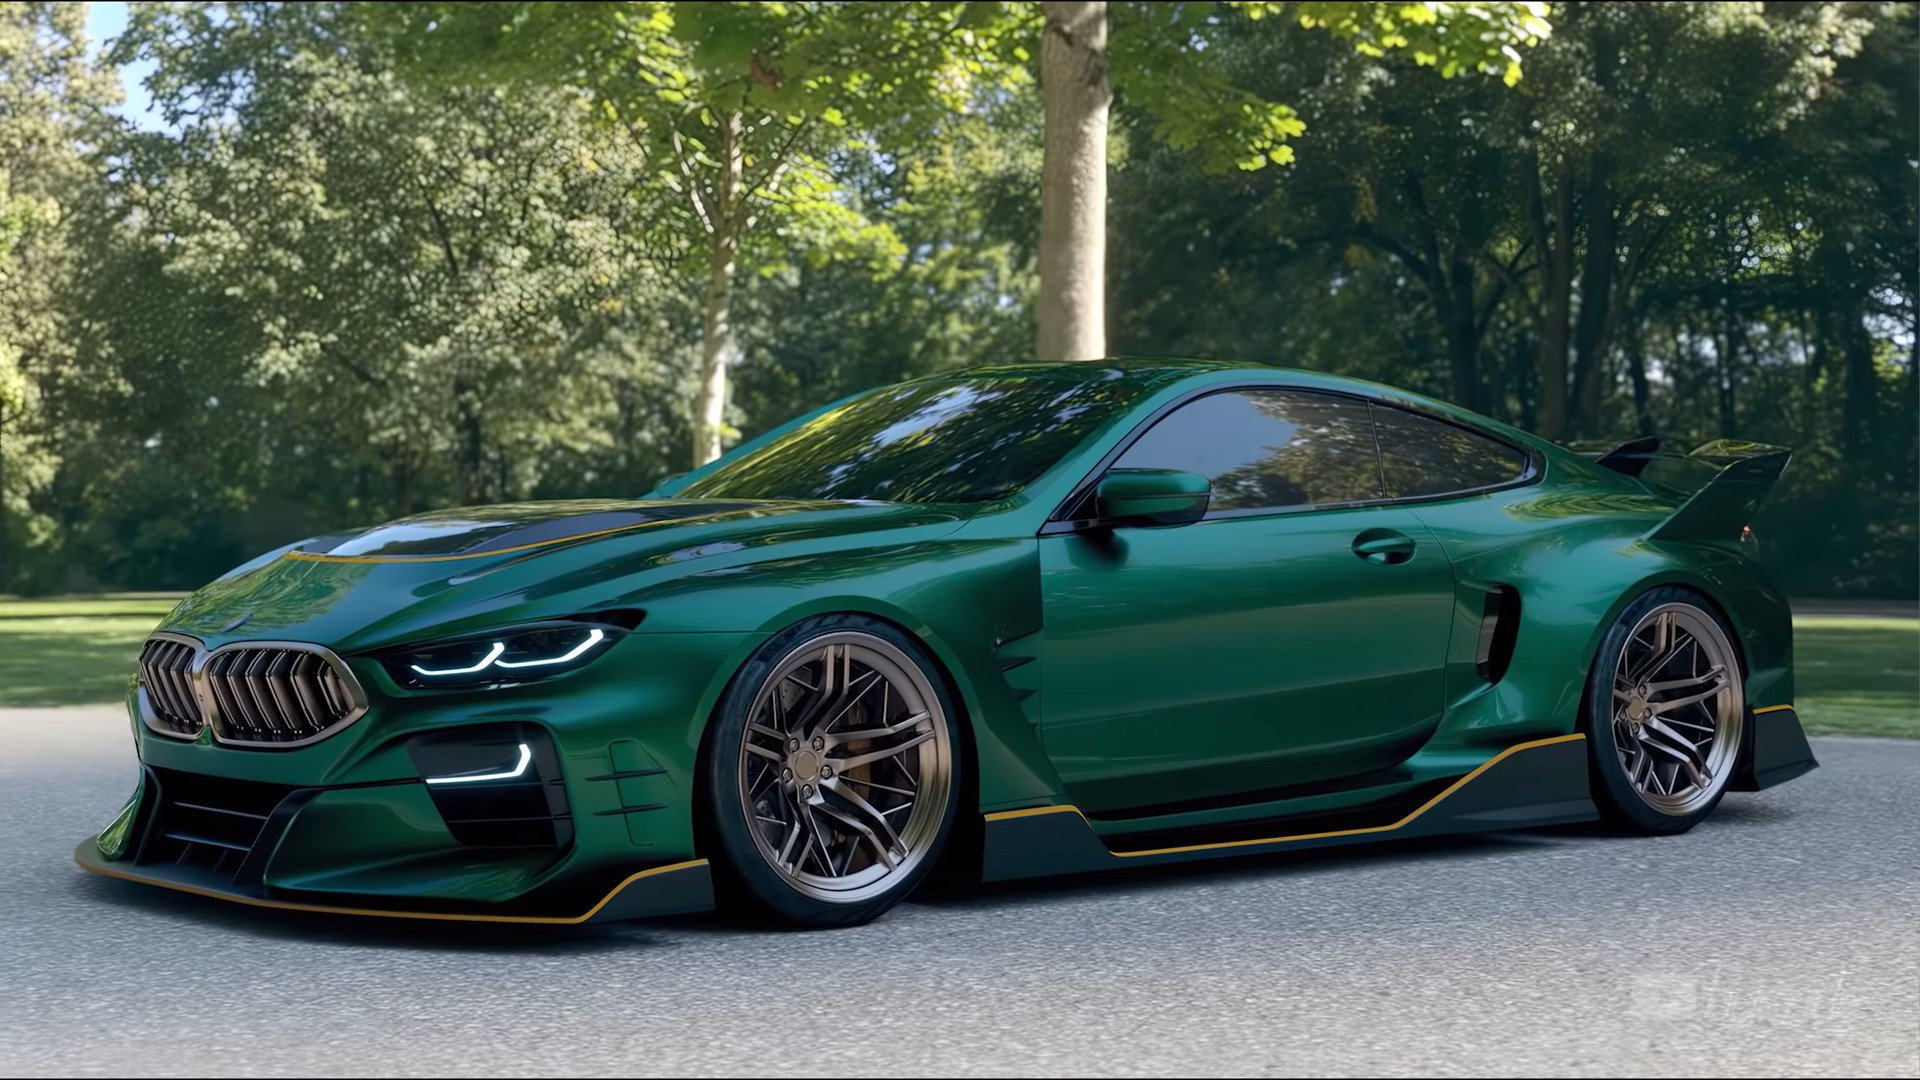 BMW M8 Coupe F91/F92/F93 GTR Custom WideBody Kit by Hycade Køb med